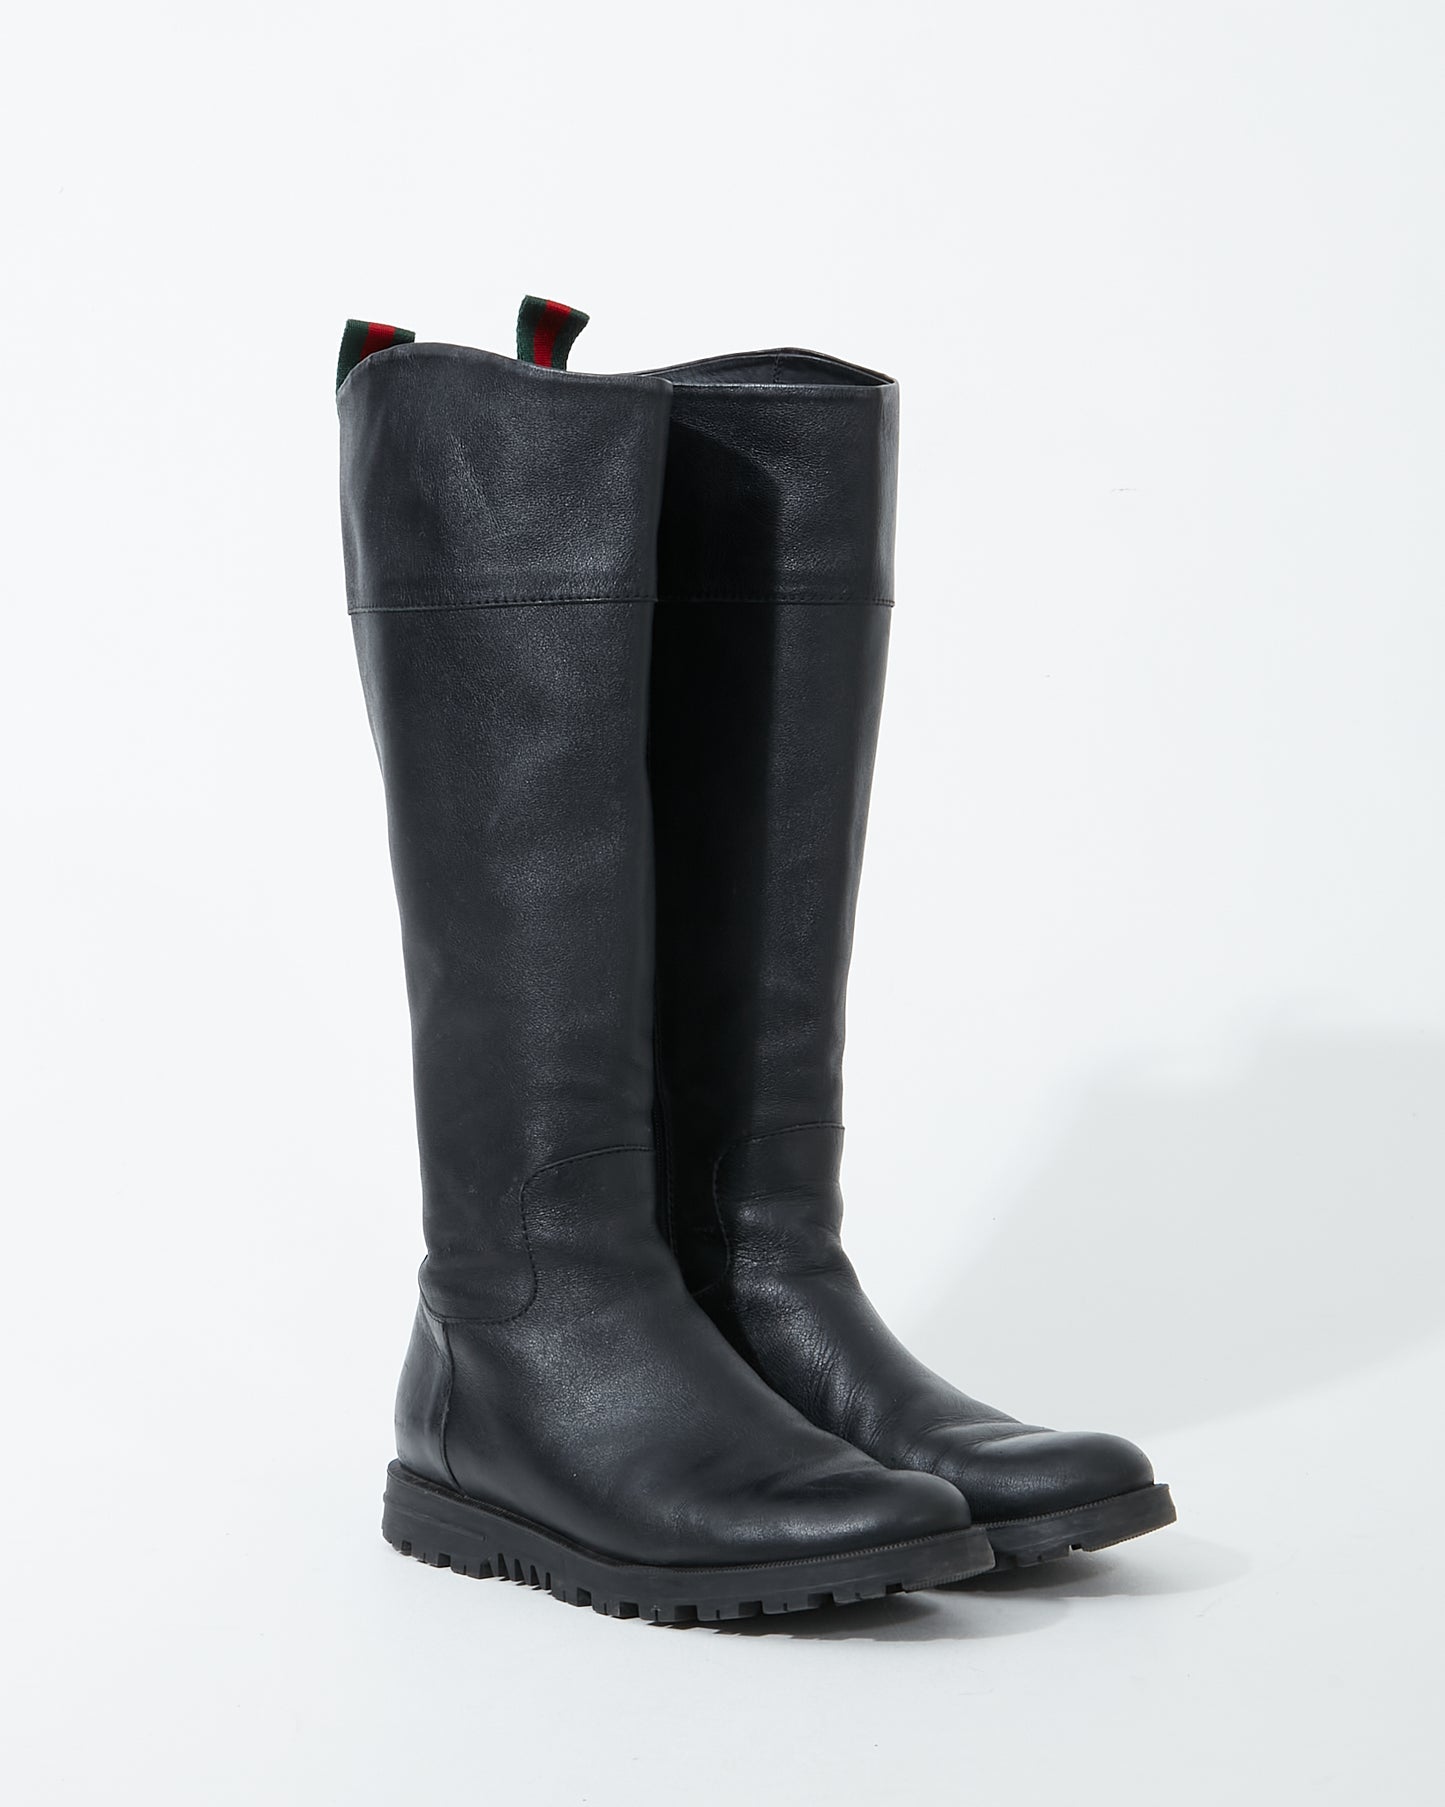 Gucci Black Leather Riding Boots - 36.5